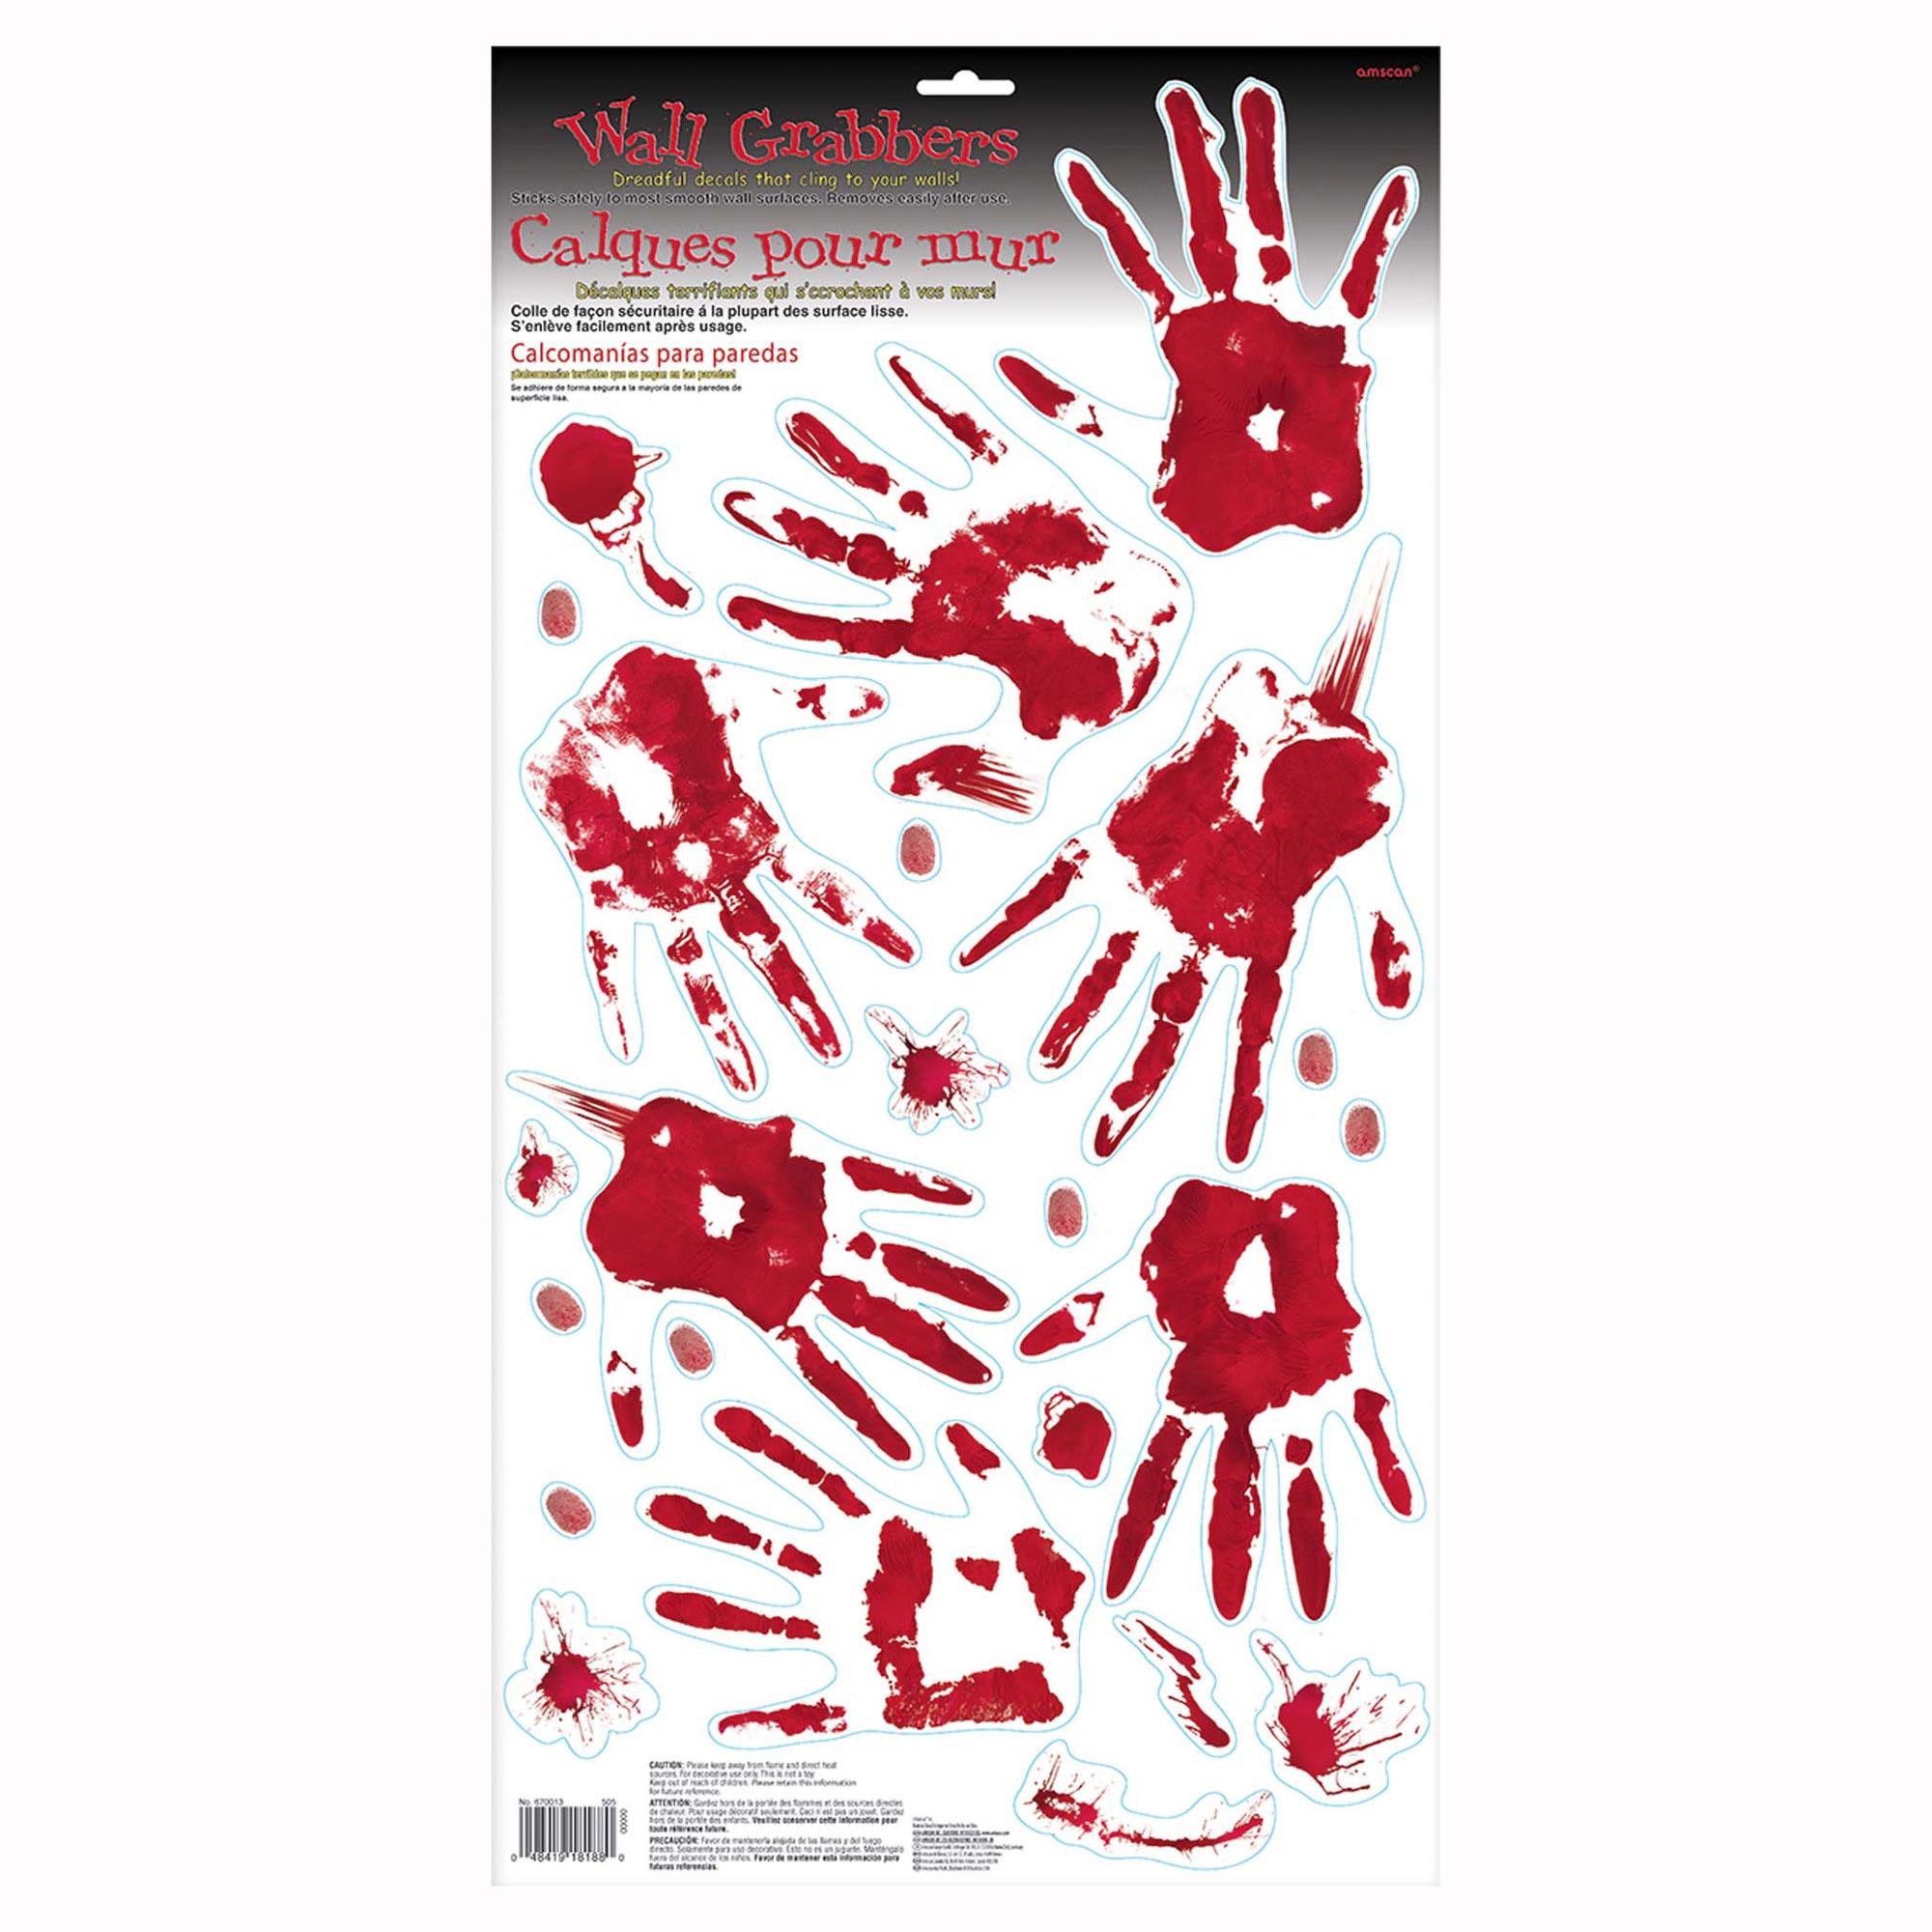 Skeleton Hand Print Wall Grabbers Decorations - Party Centre